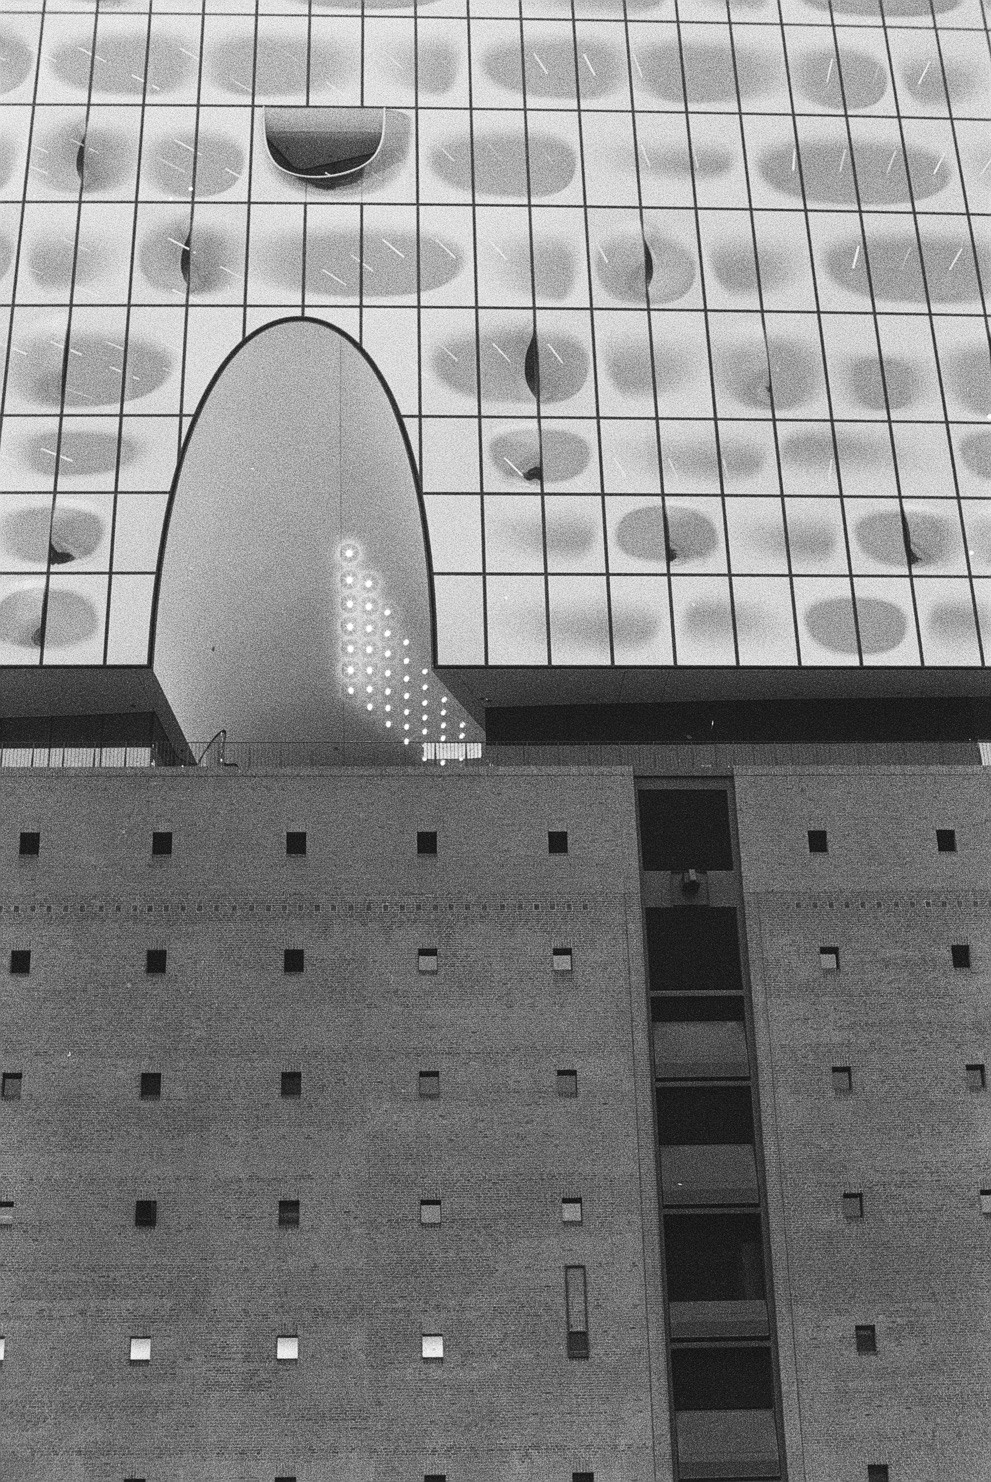 Detailed architecture image of the Elbphilharmonie. Shot on Ilford Delta 3200